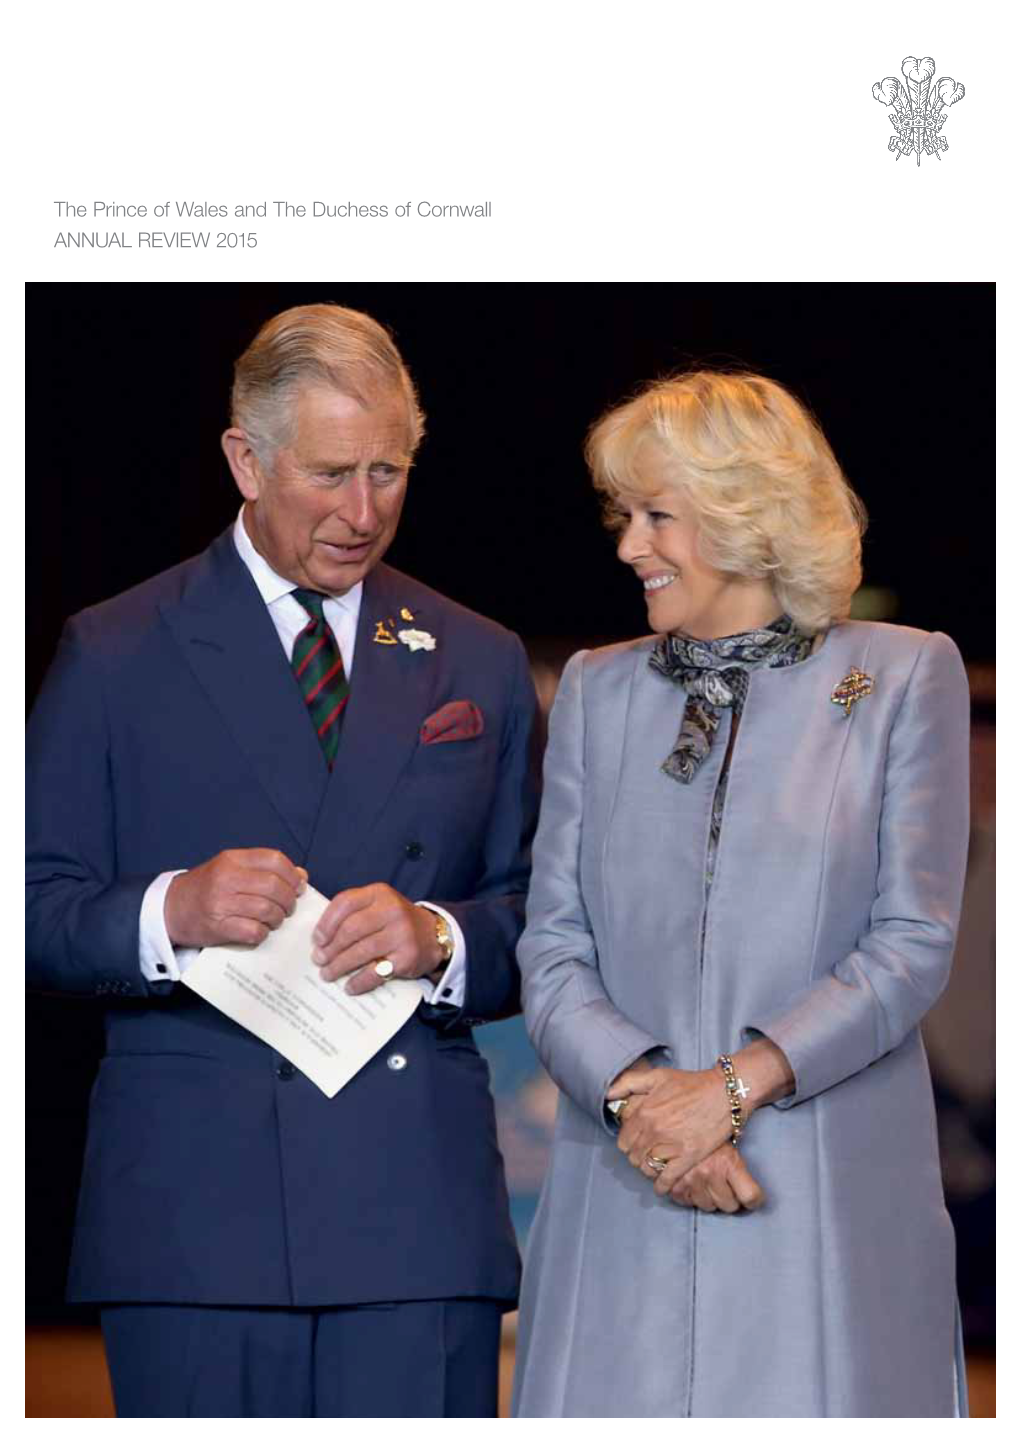 The Prince of Wales and the Duchess of Cornwall Annual Review 2015 02 Summary